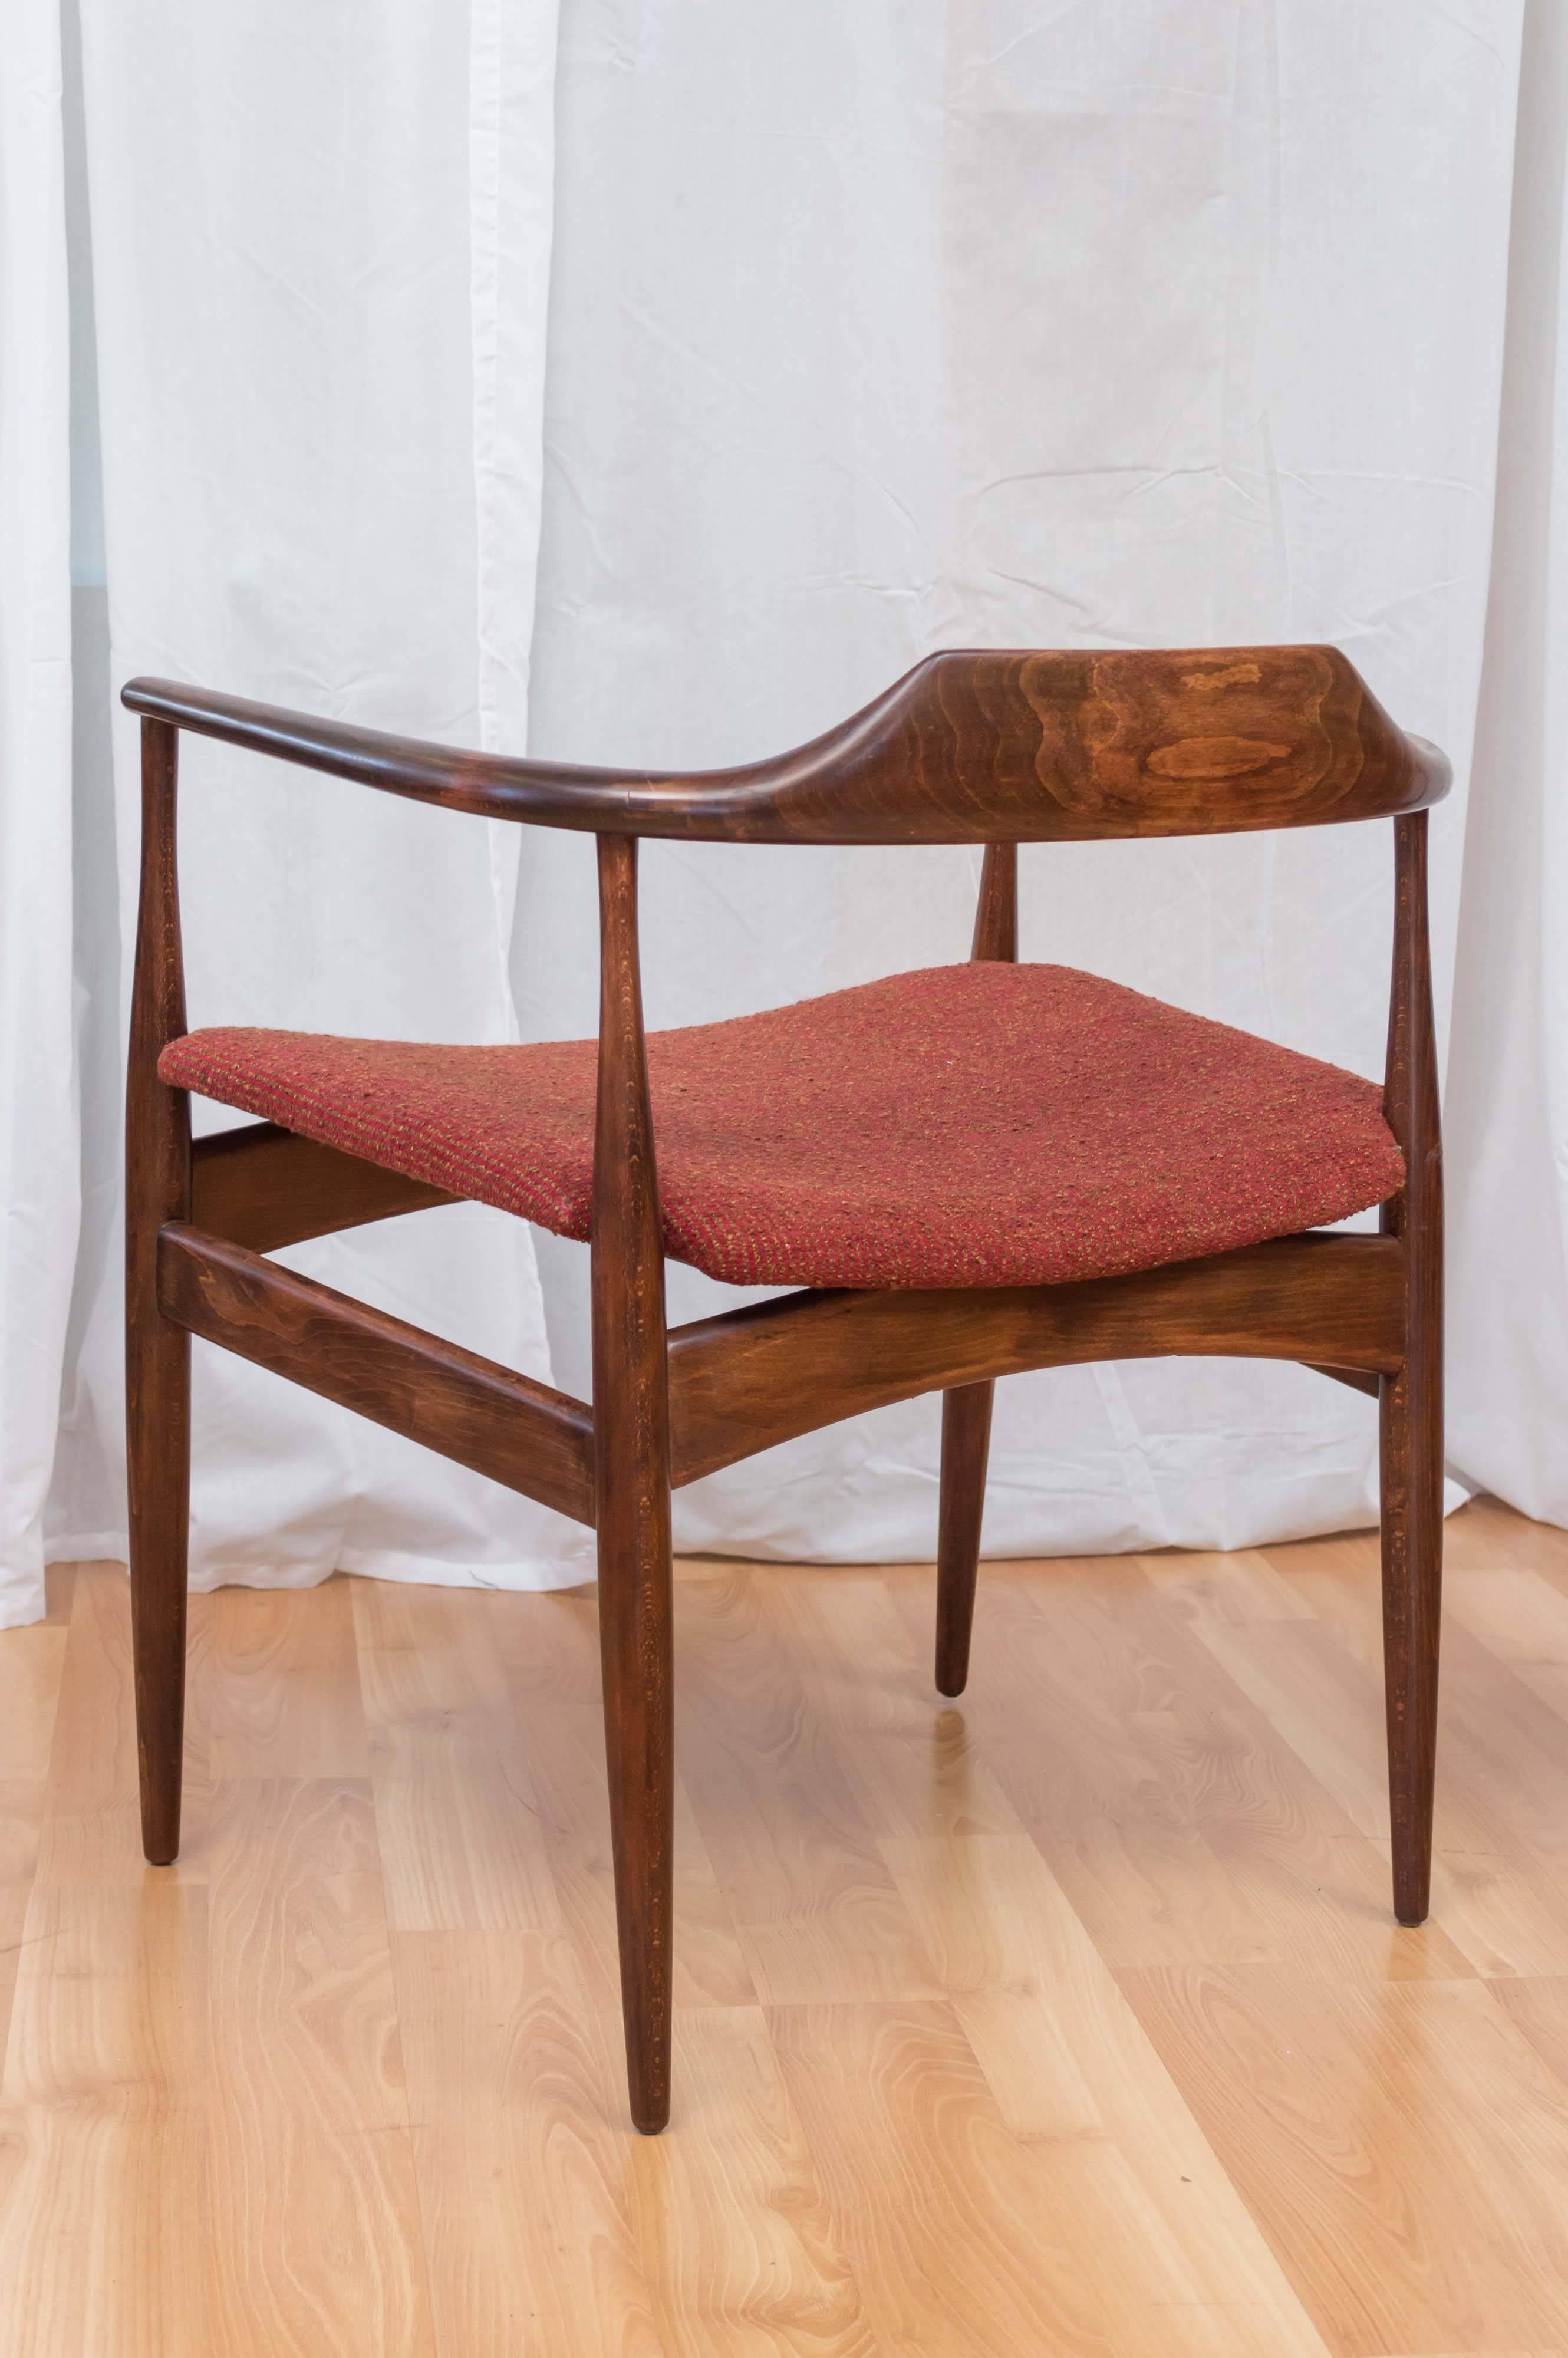 Mid-20th Century Six-Piece Set of Dining Chairs by Ib Kofod-Larsen for Selig